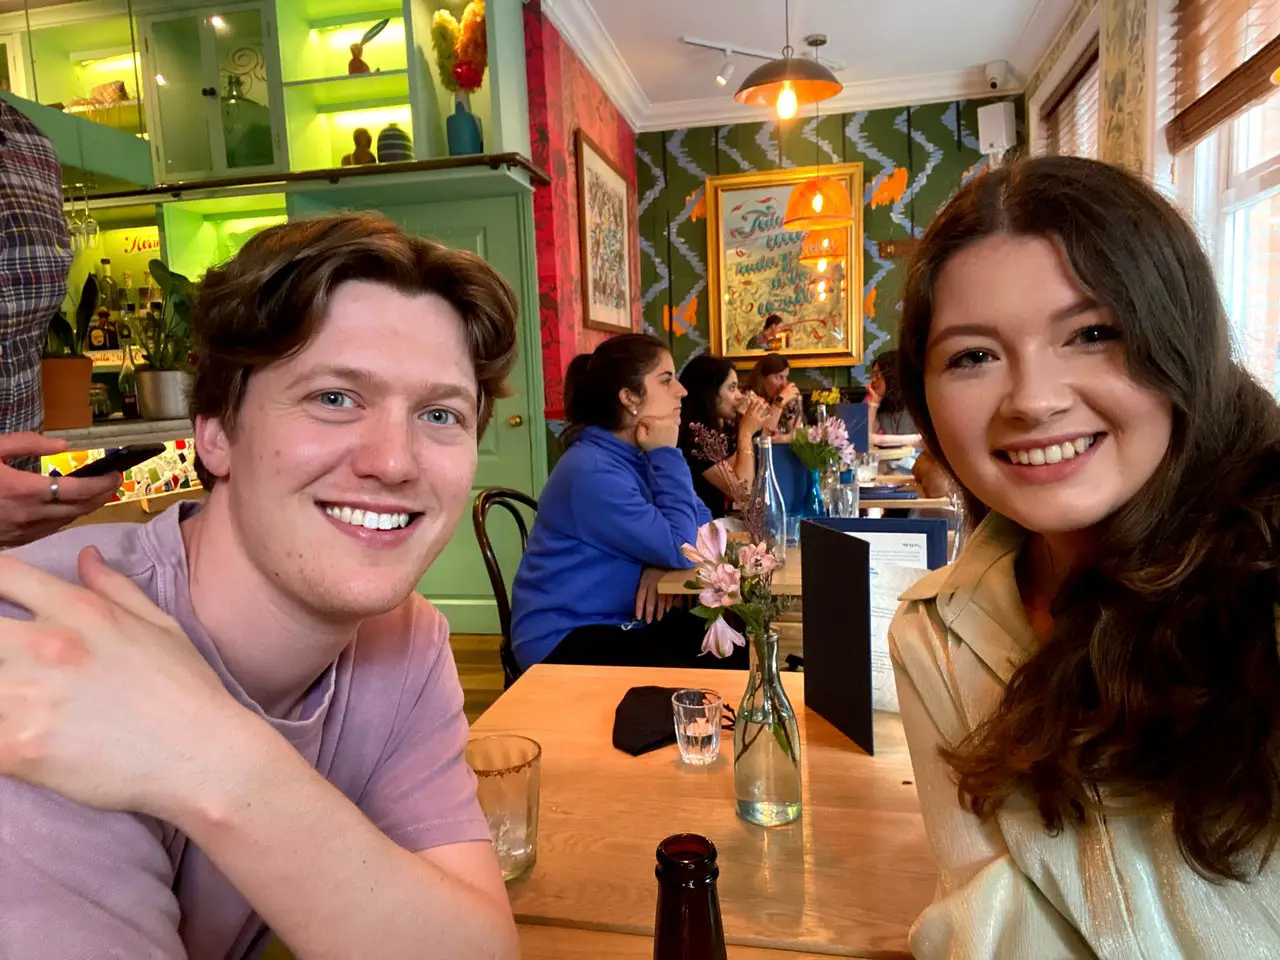 Ella and Rob visiting a restaurant in London - where the food prices are pretty high!